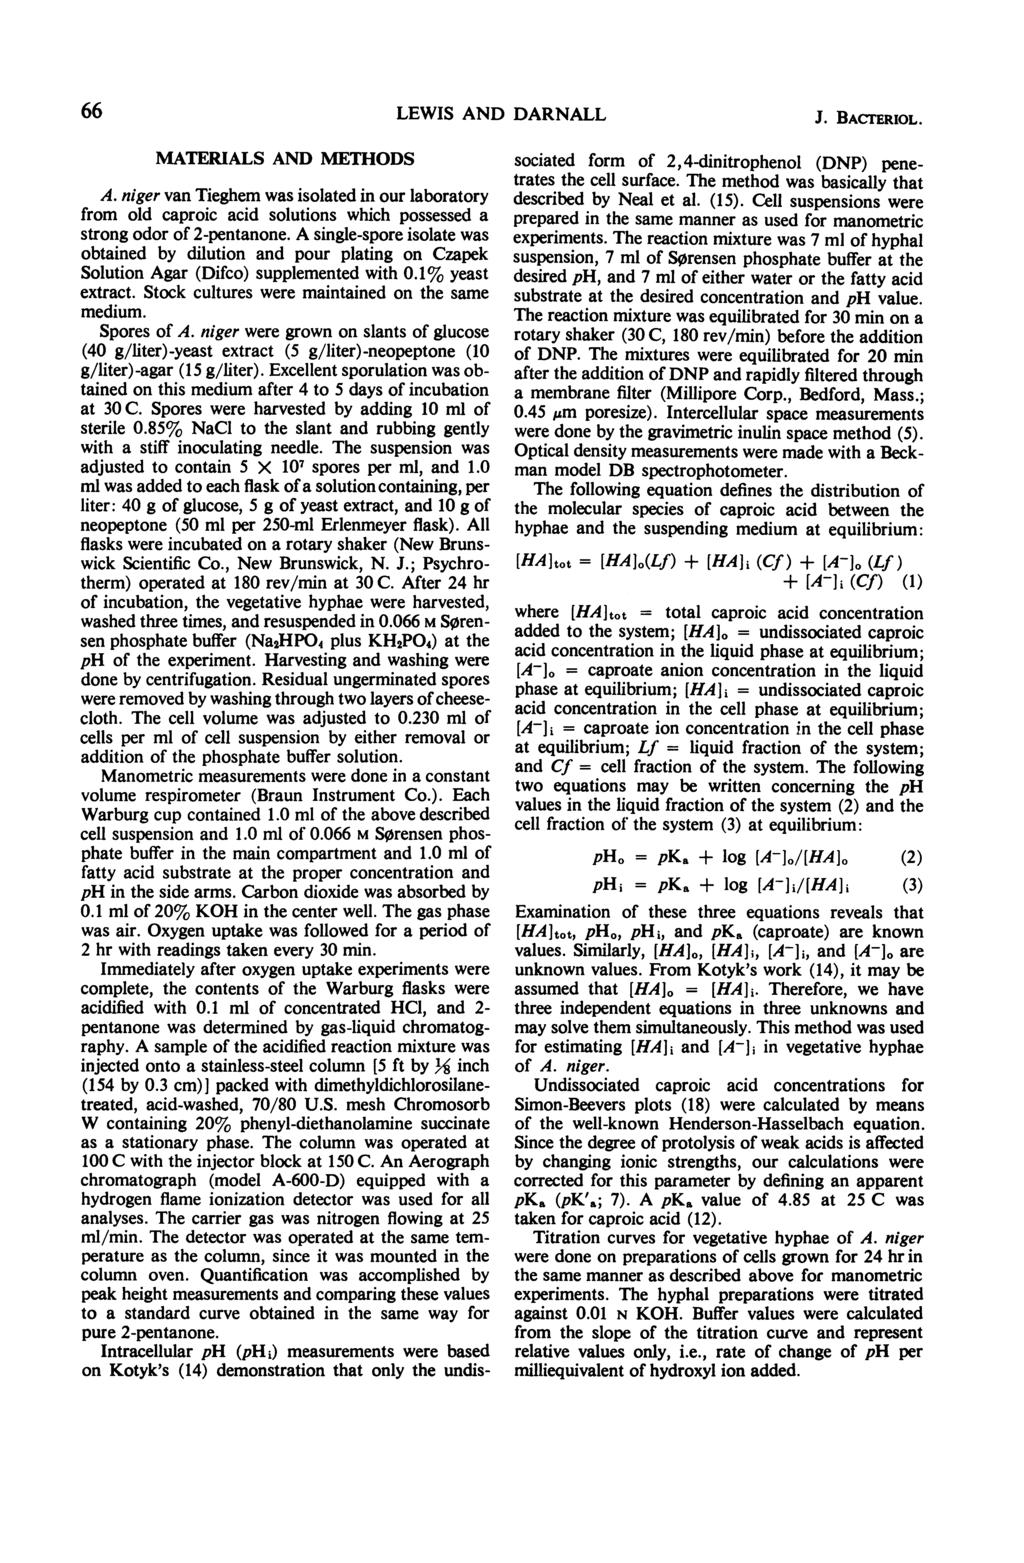 66 LEWIS AND DARNALL J. BACTERIOL. MATERIALS AND METHODS A. niger van Tieghem was isolated in our laboratory from old caproic acid solutions which possessed a strong odor of 2-pentanone.